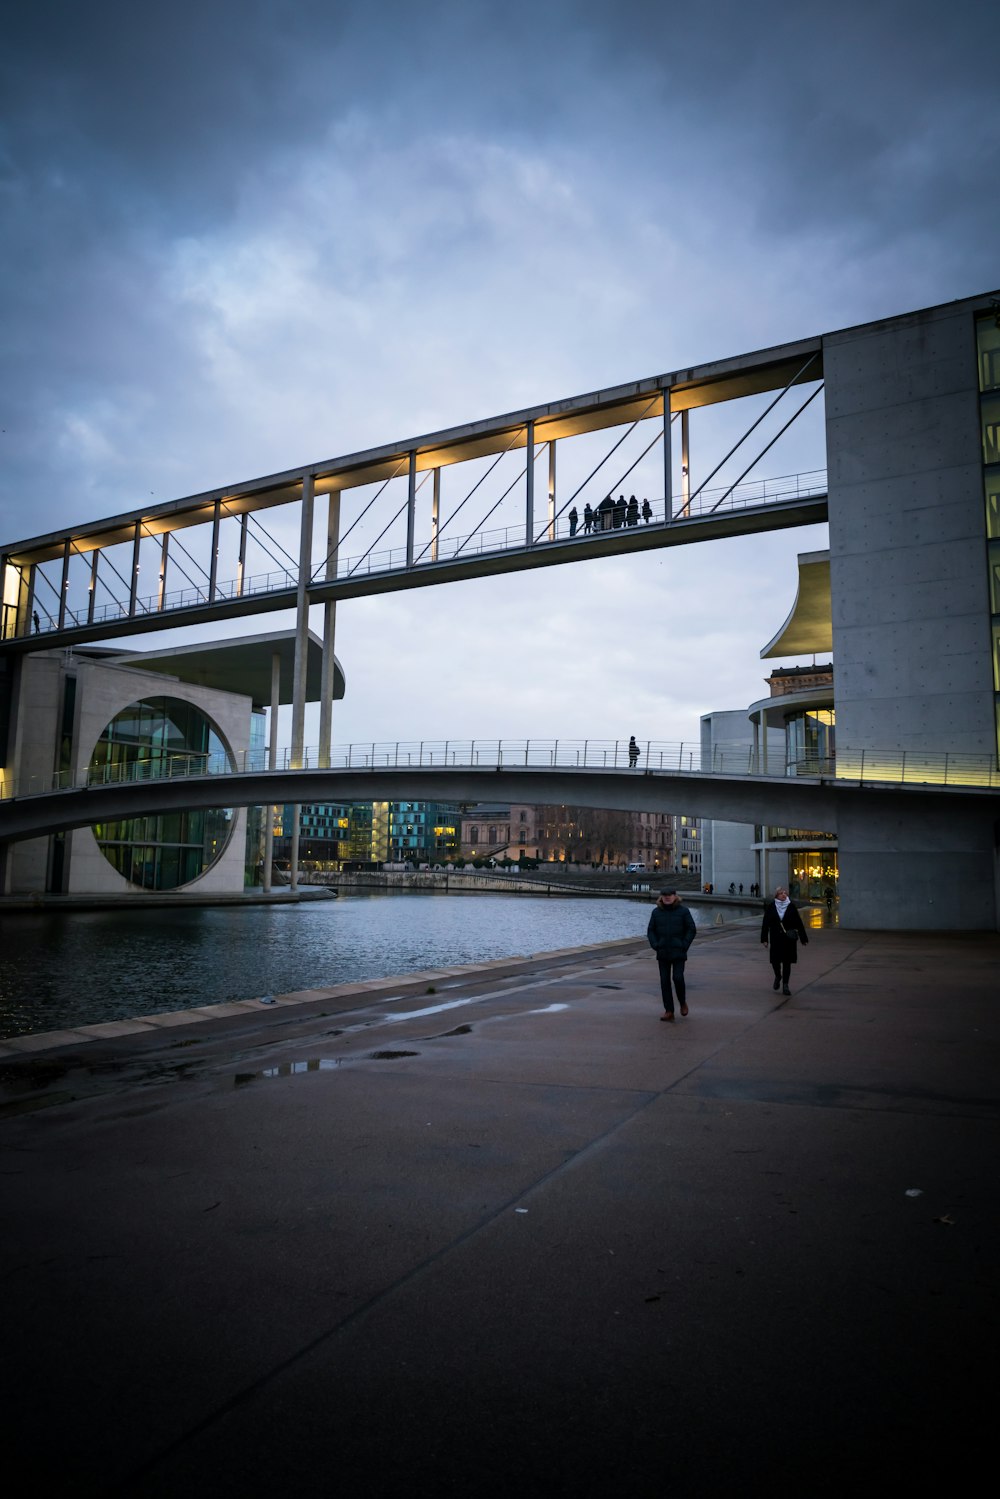 people walking on gray concrete bridge under gray cloudy sky during daytime